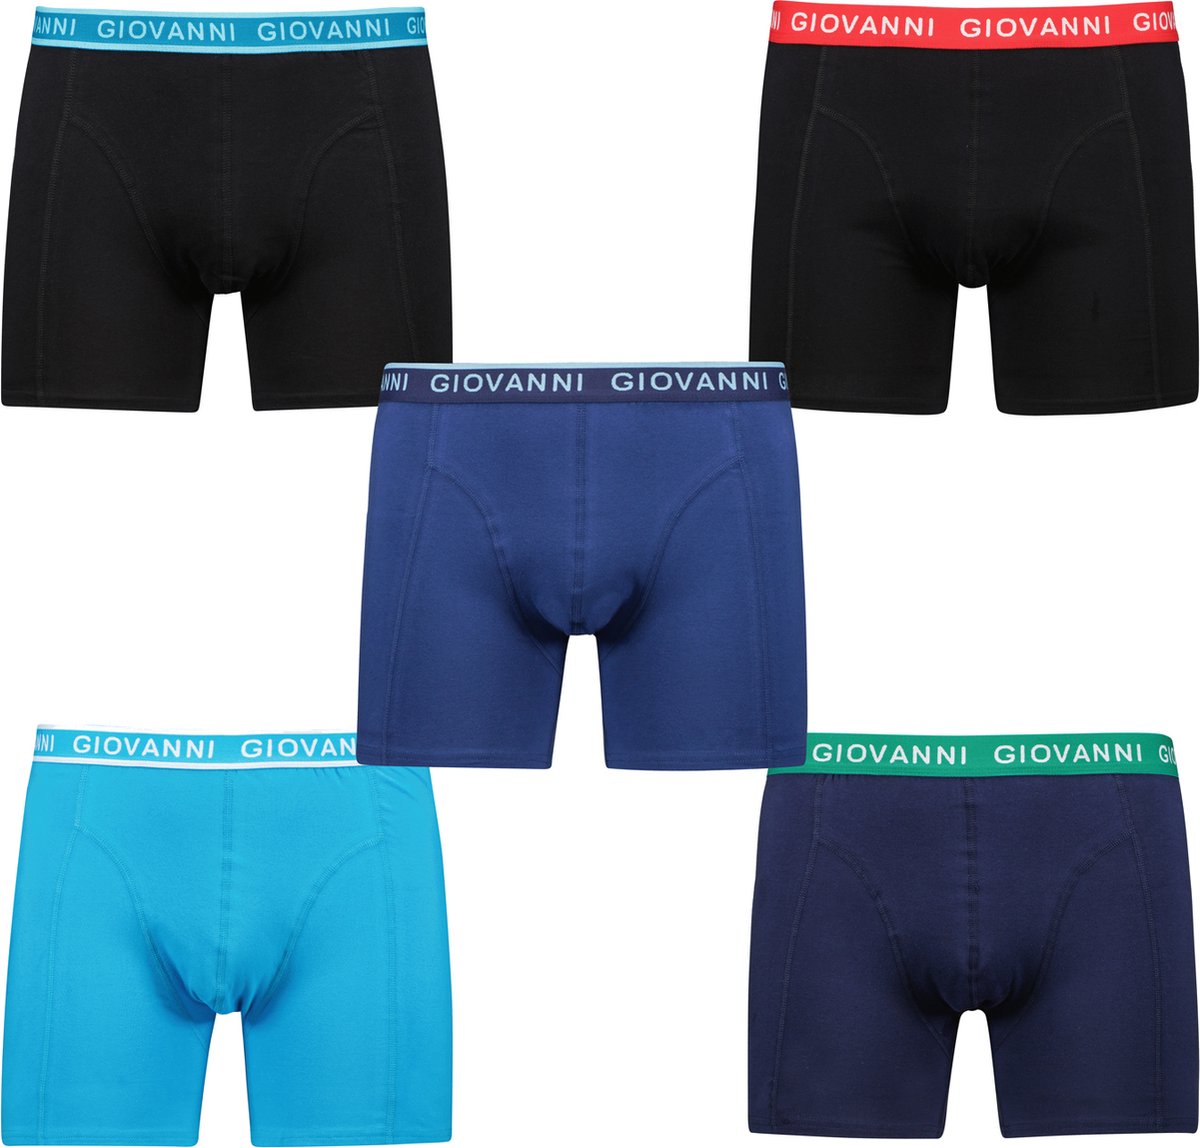 Giovanni Heren Boxershorts 5Pack Montreal M35A | Maat L